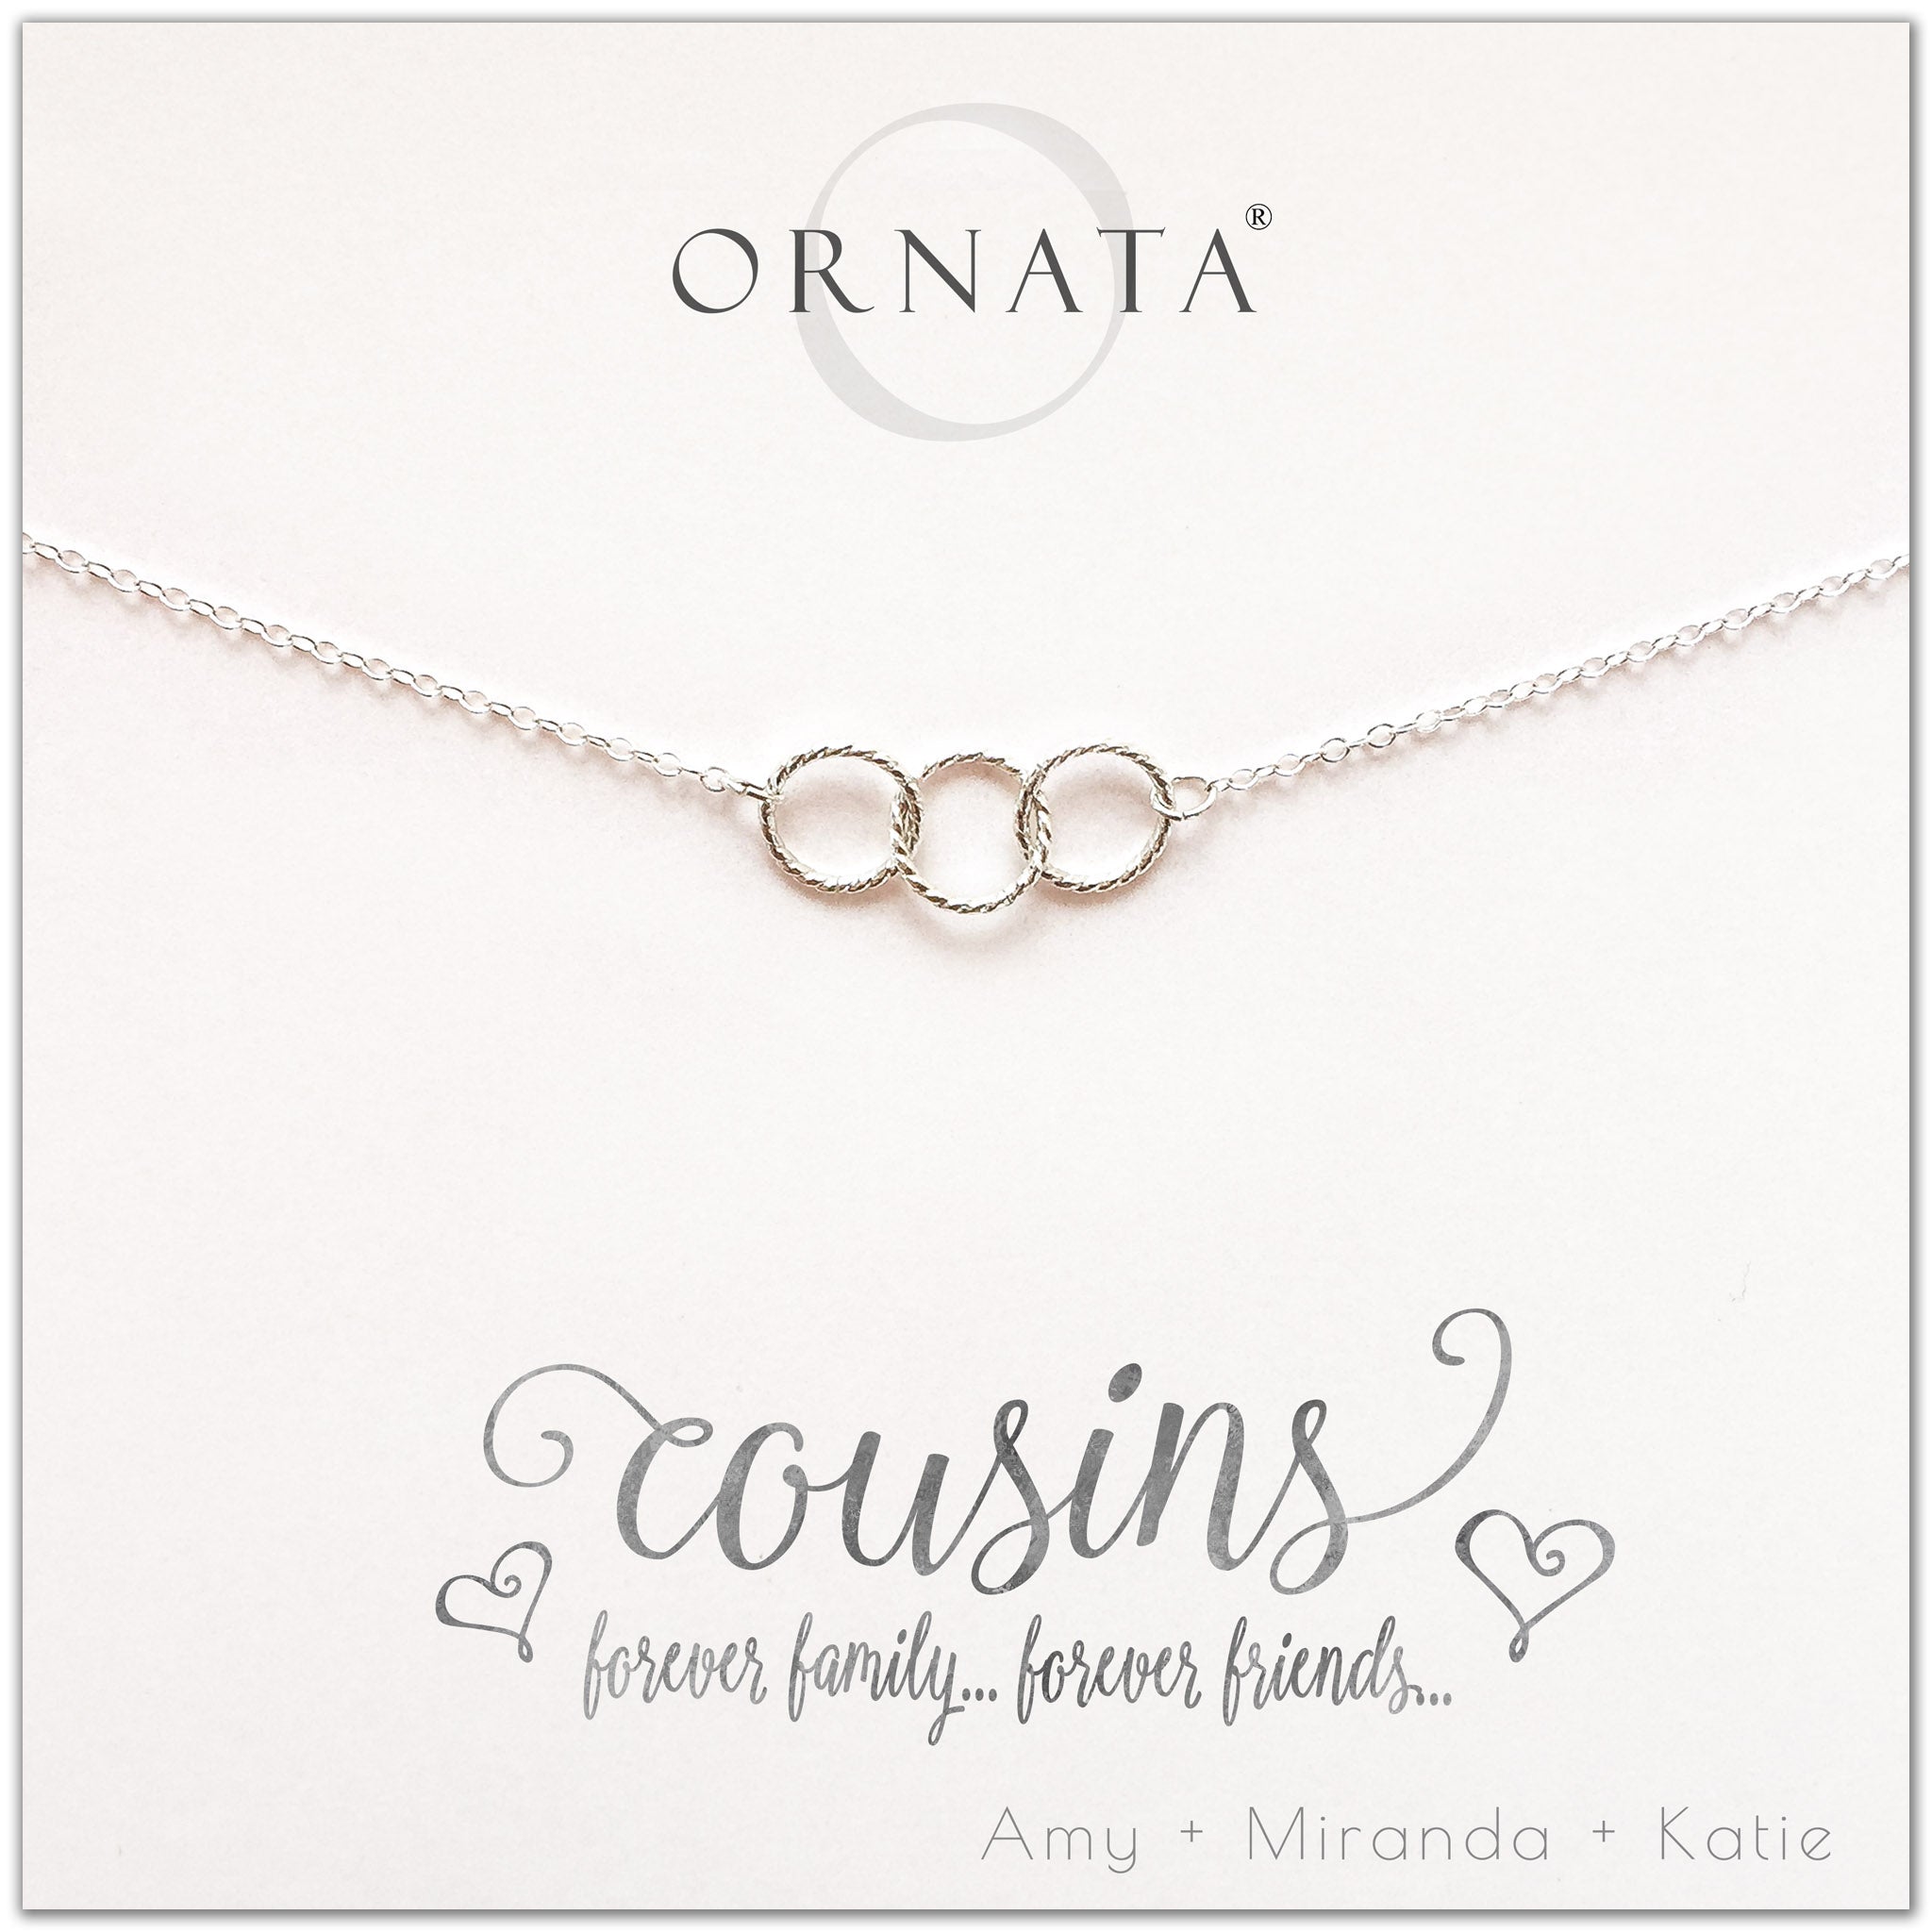 Cousins necklace - personalized silver necklaces. Our sterling silver custom jewelry is a perfect gift for cousins who are also best friends. Interlocking rings show the special bond between cousins. 